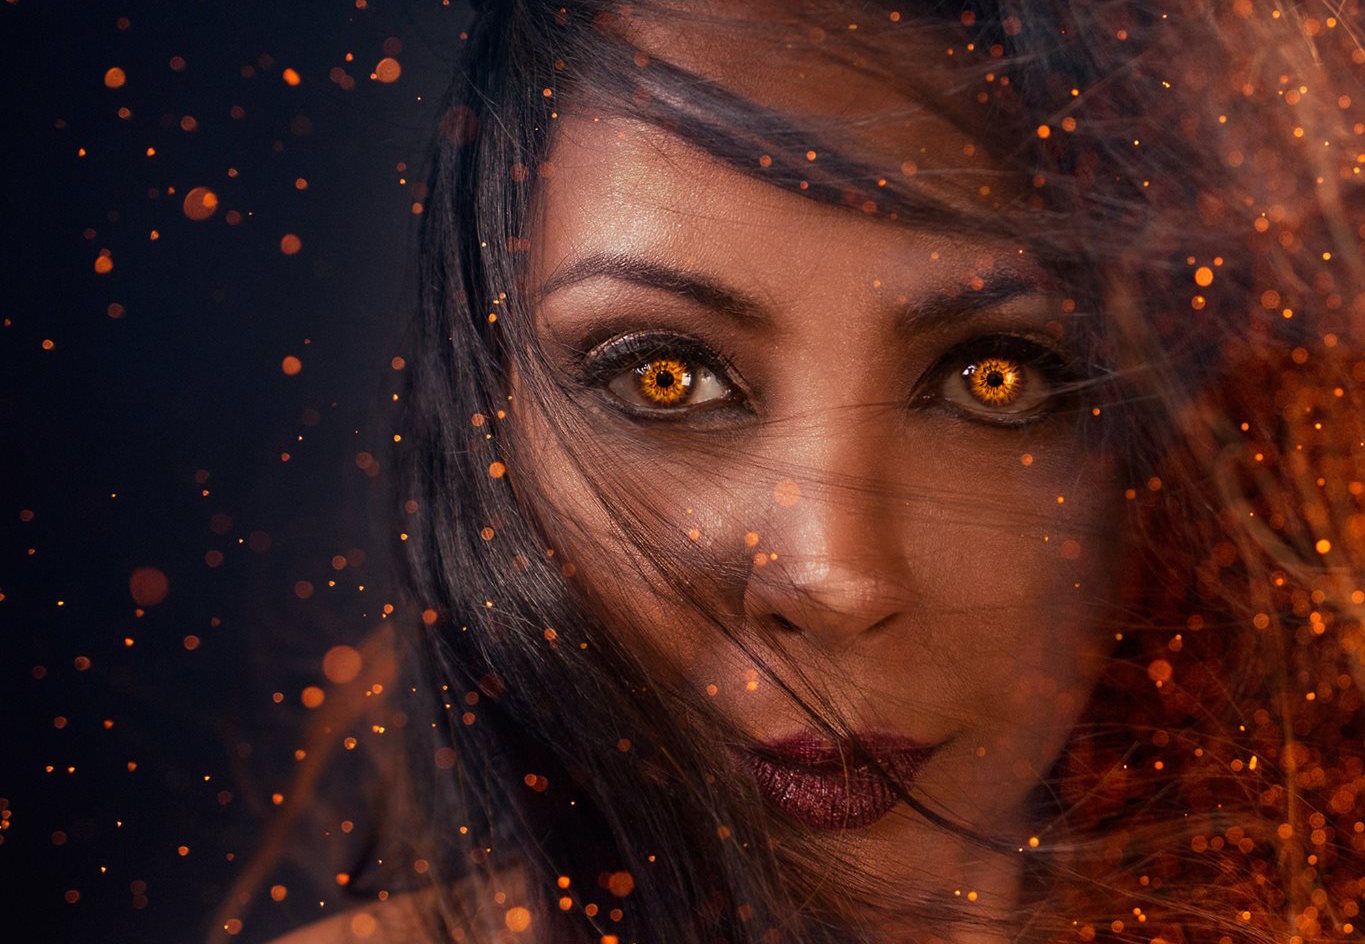 Photoshop Power Tip: Using Screen Blending to Spice Up a Portrait